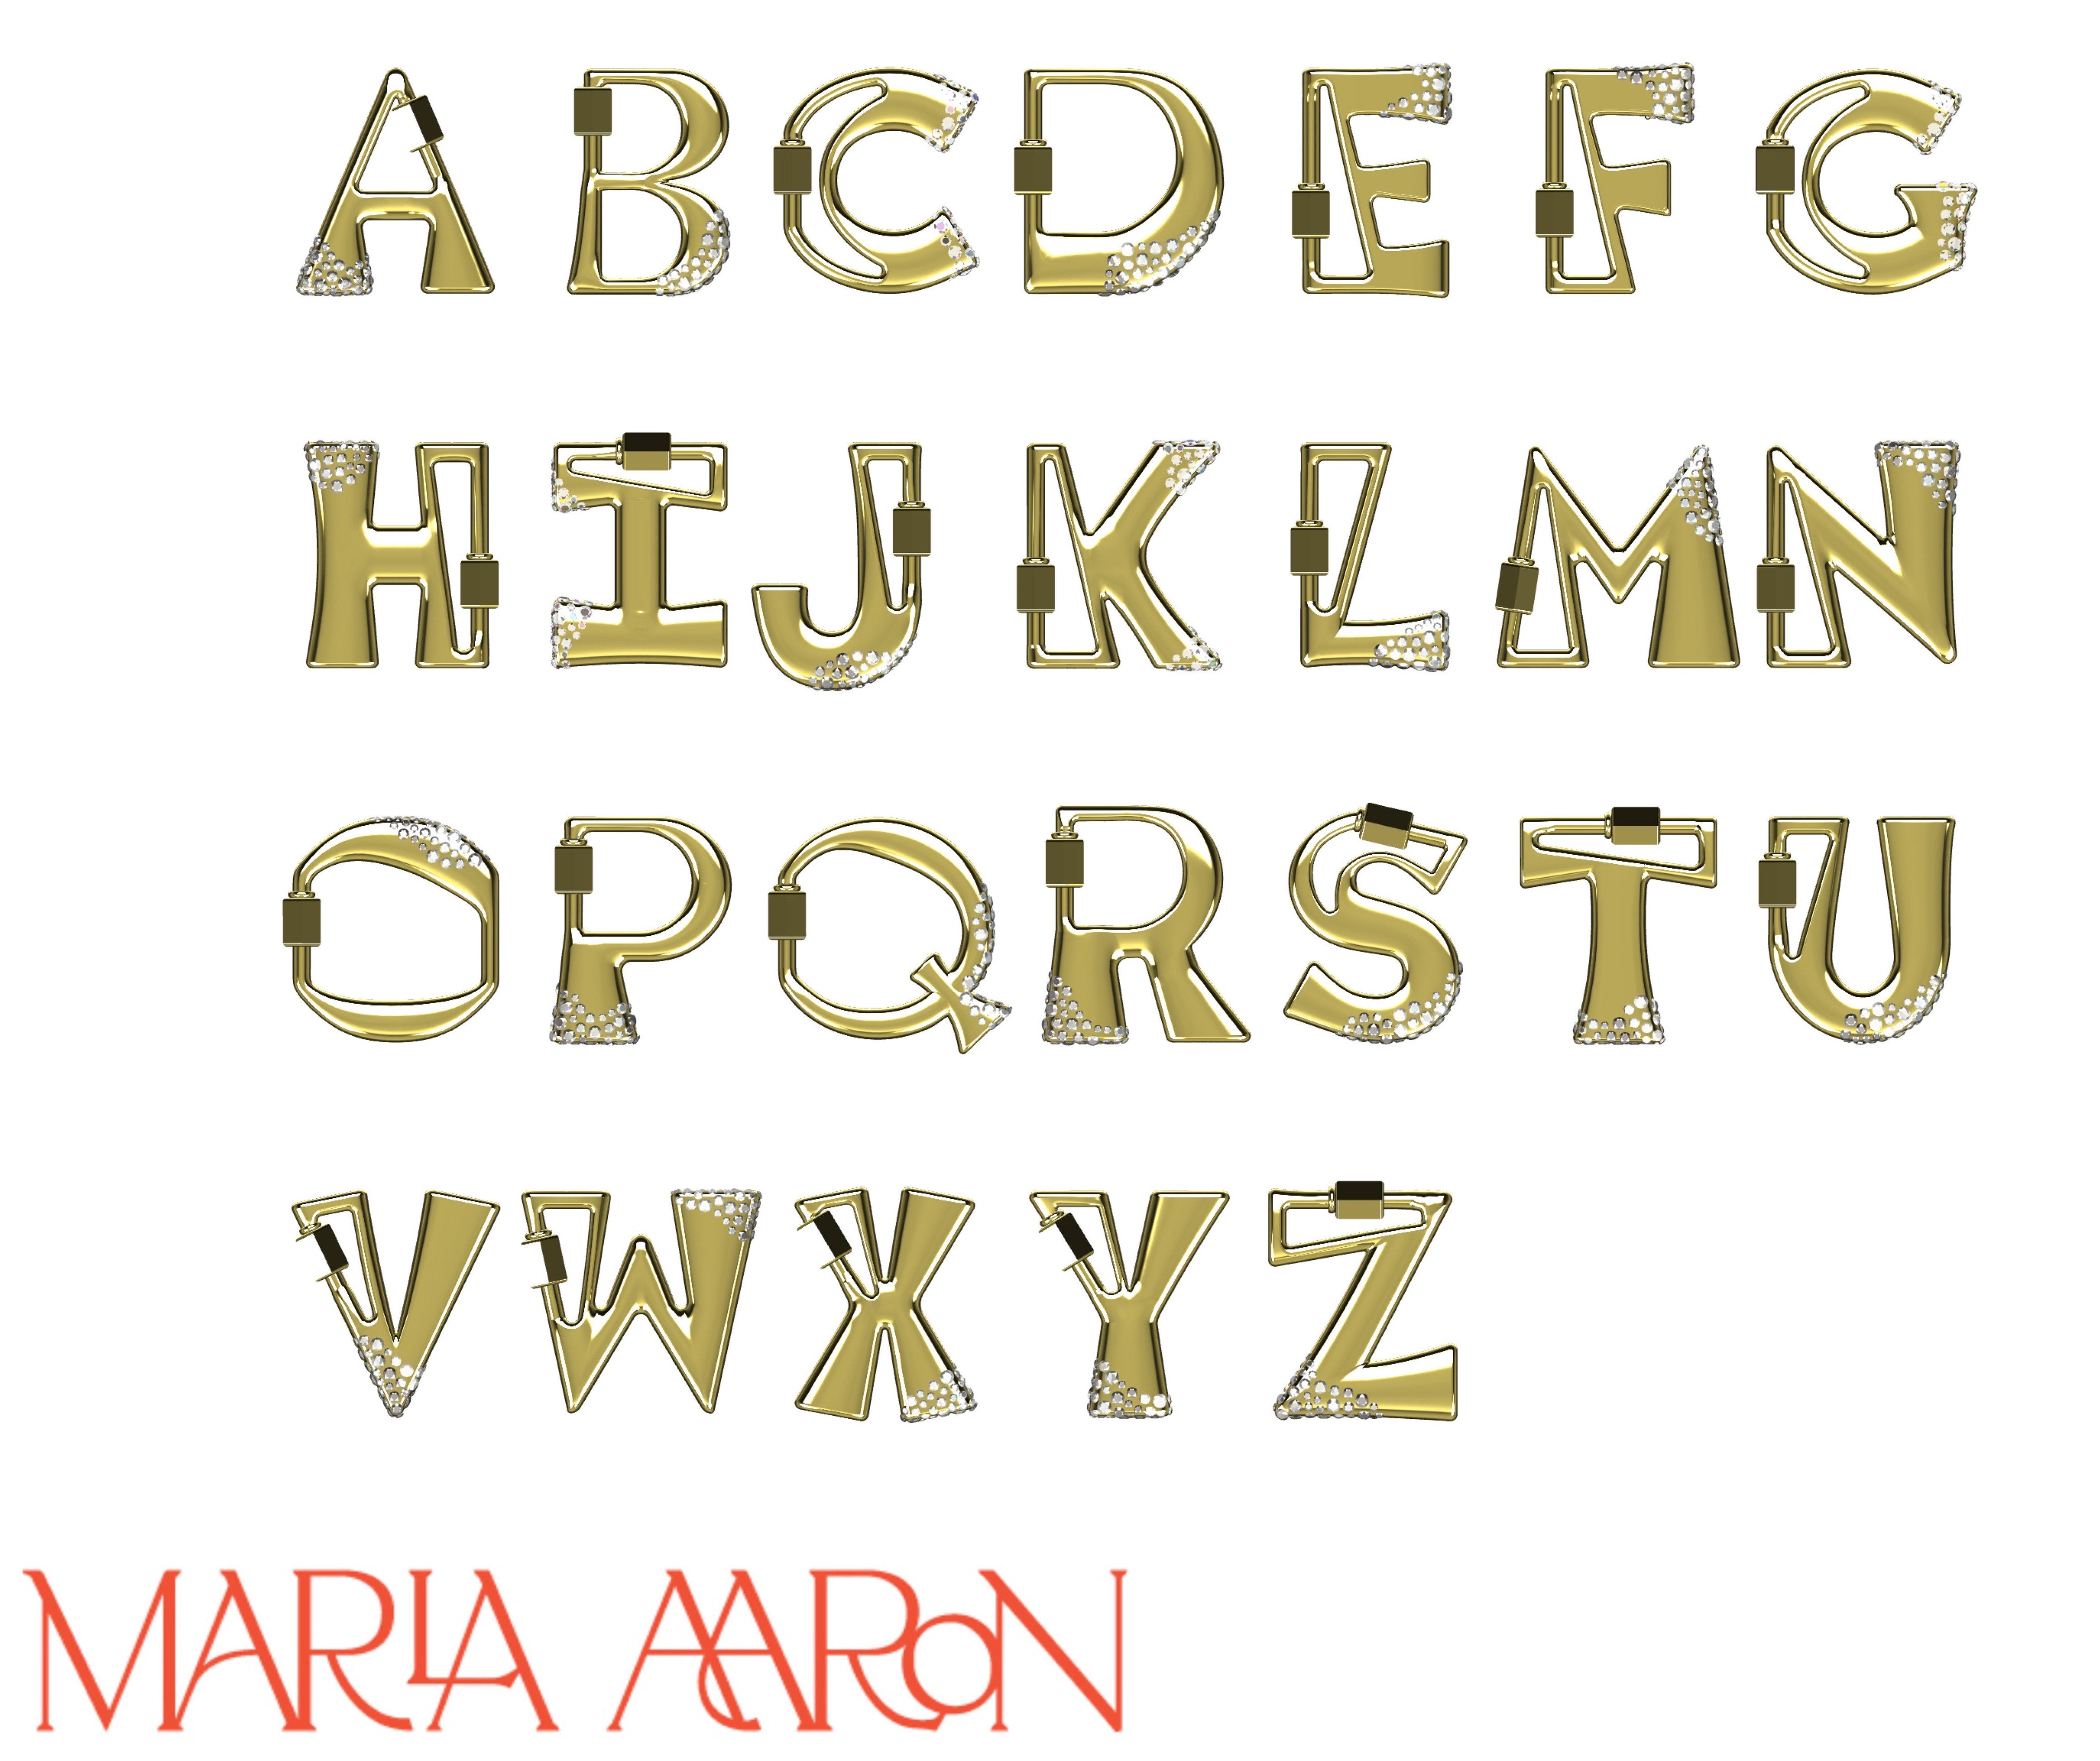 Gold locks of every letter of the alphabet including F charm against white backdrop with Marla Aaron logo in bottom left corner